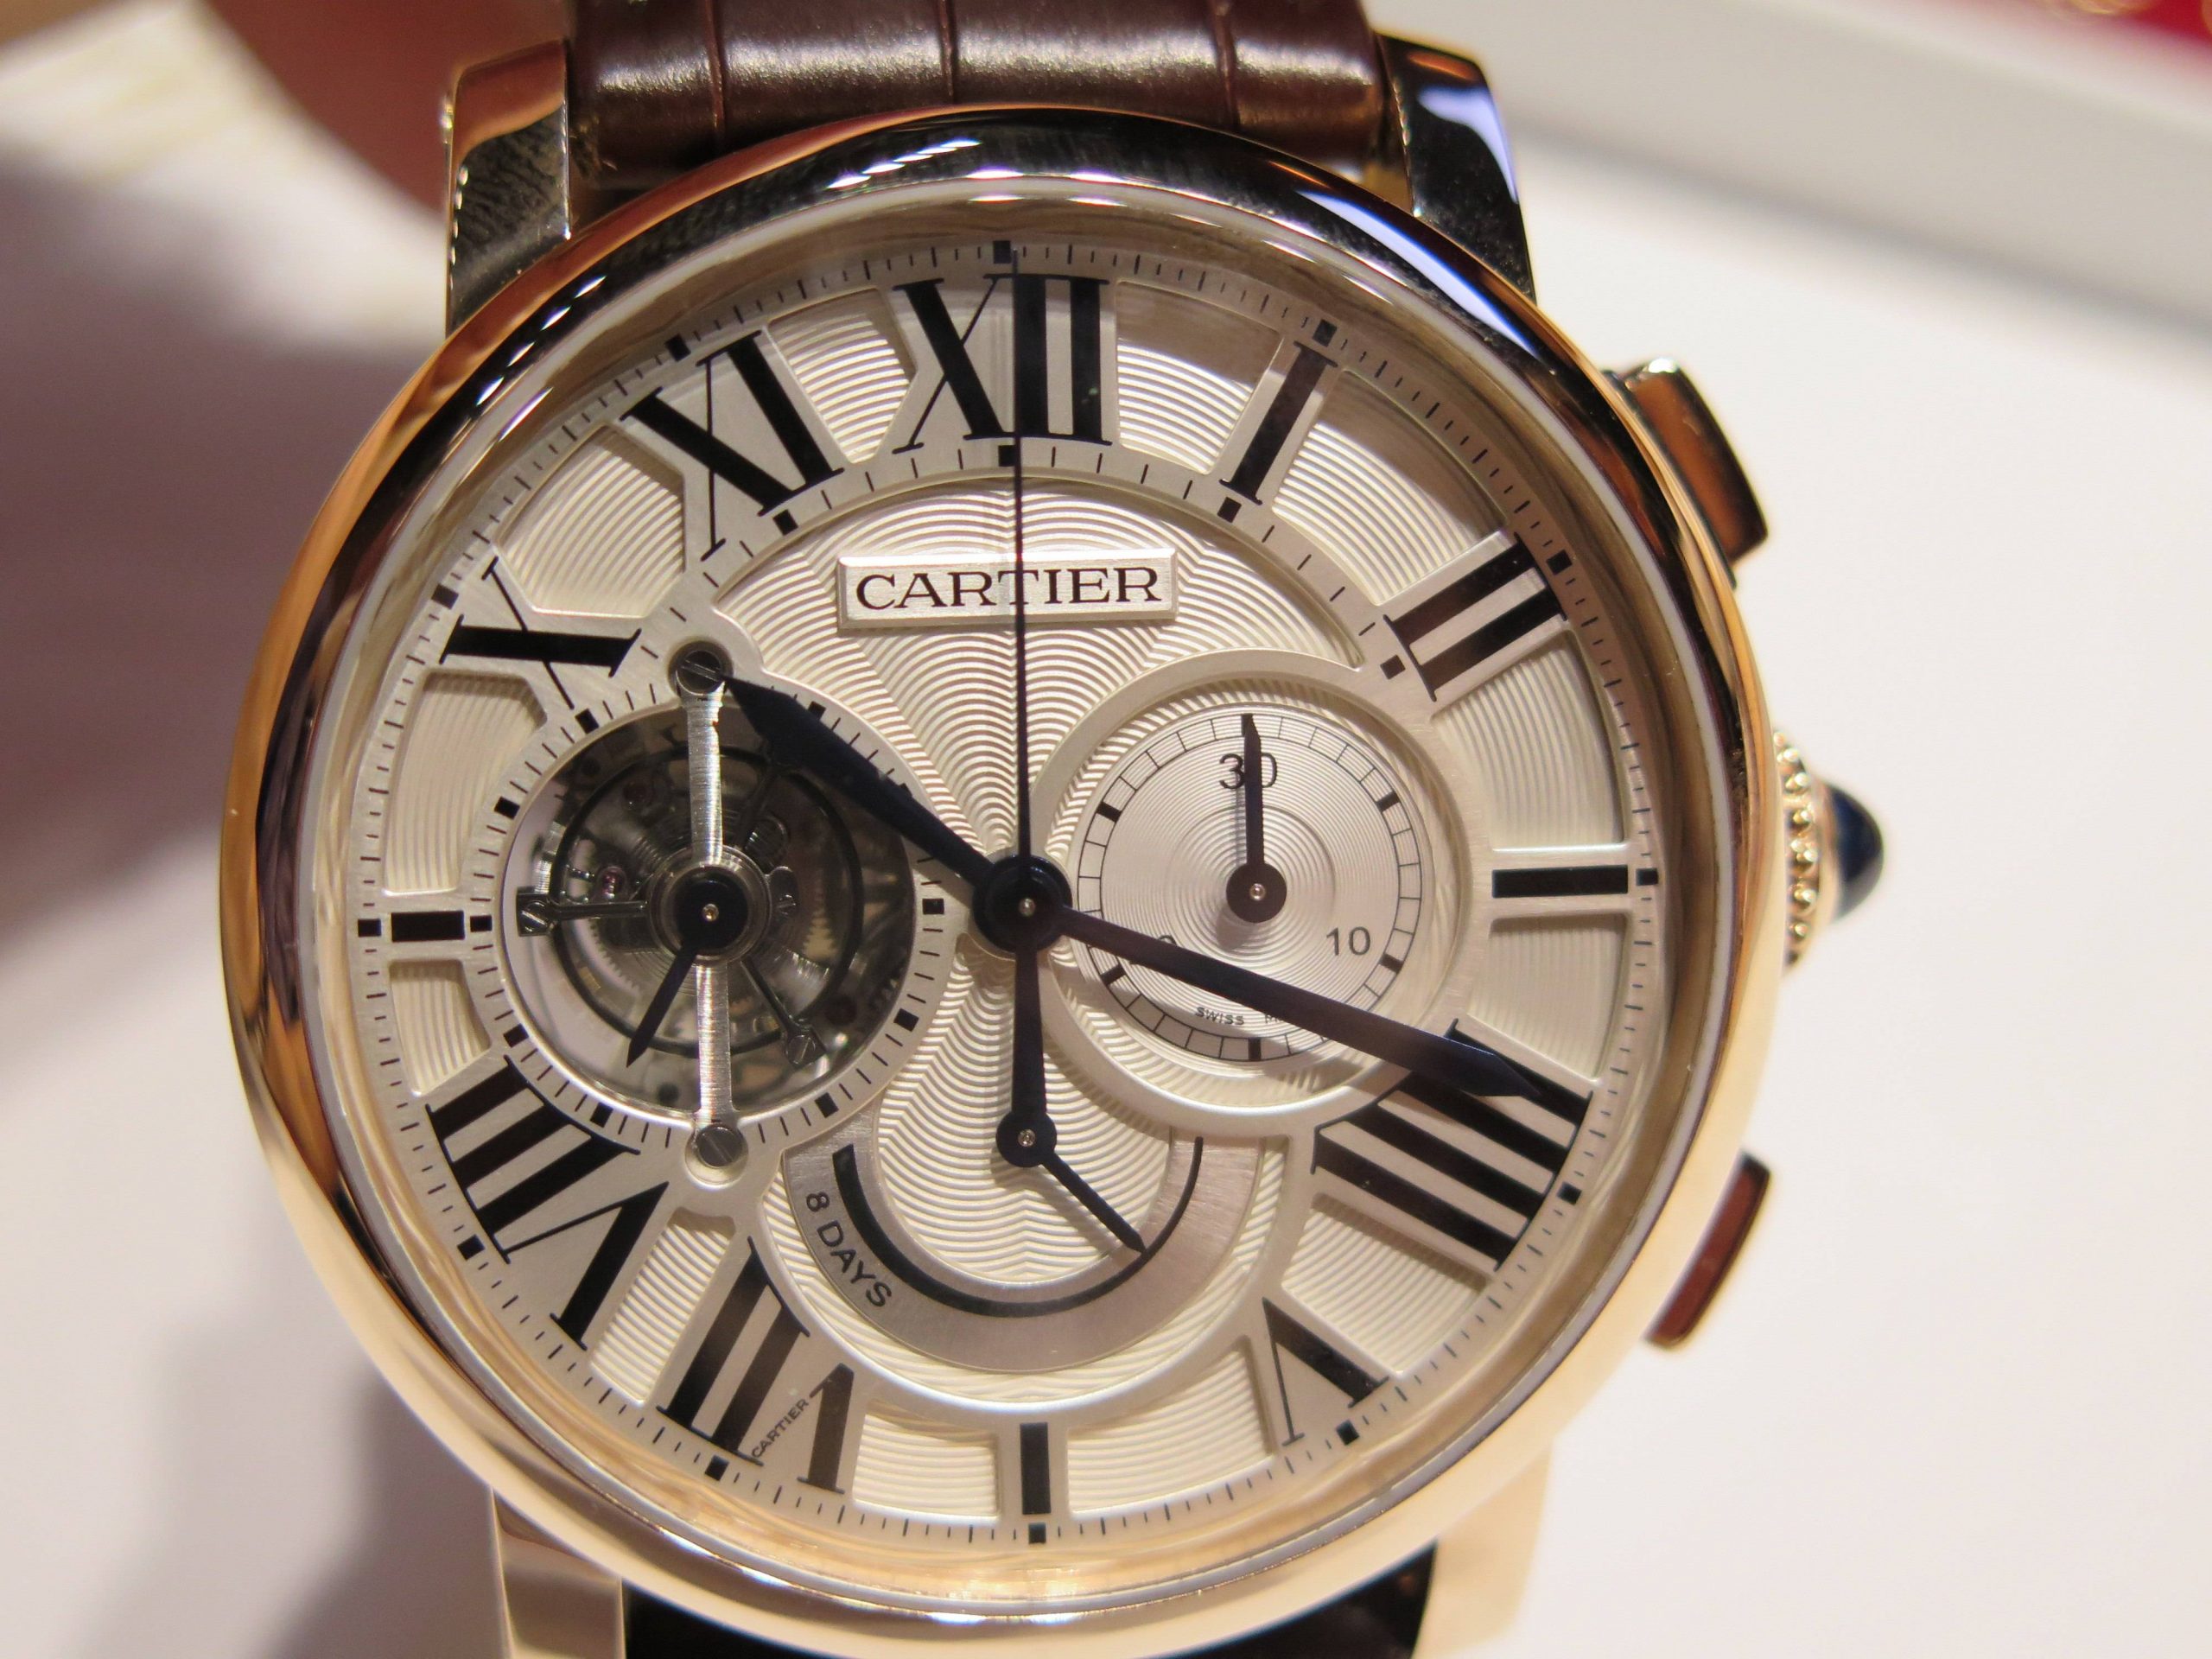 SIHH Coverage: Cartier, the Master Watchmaker